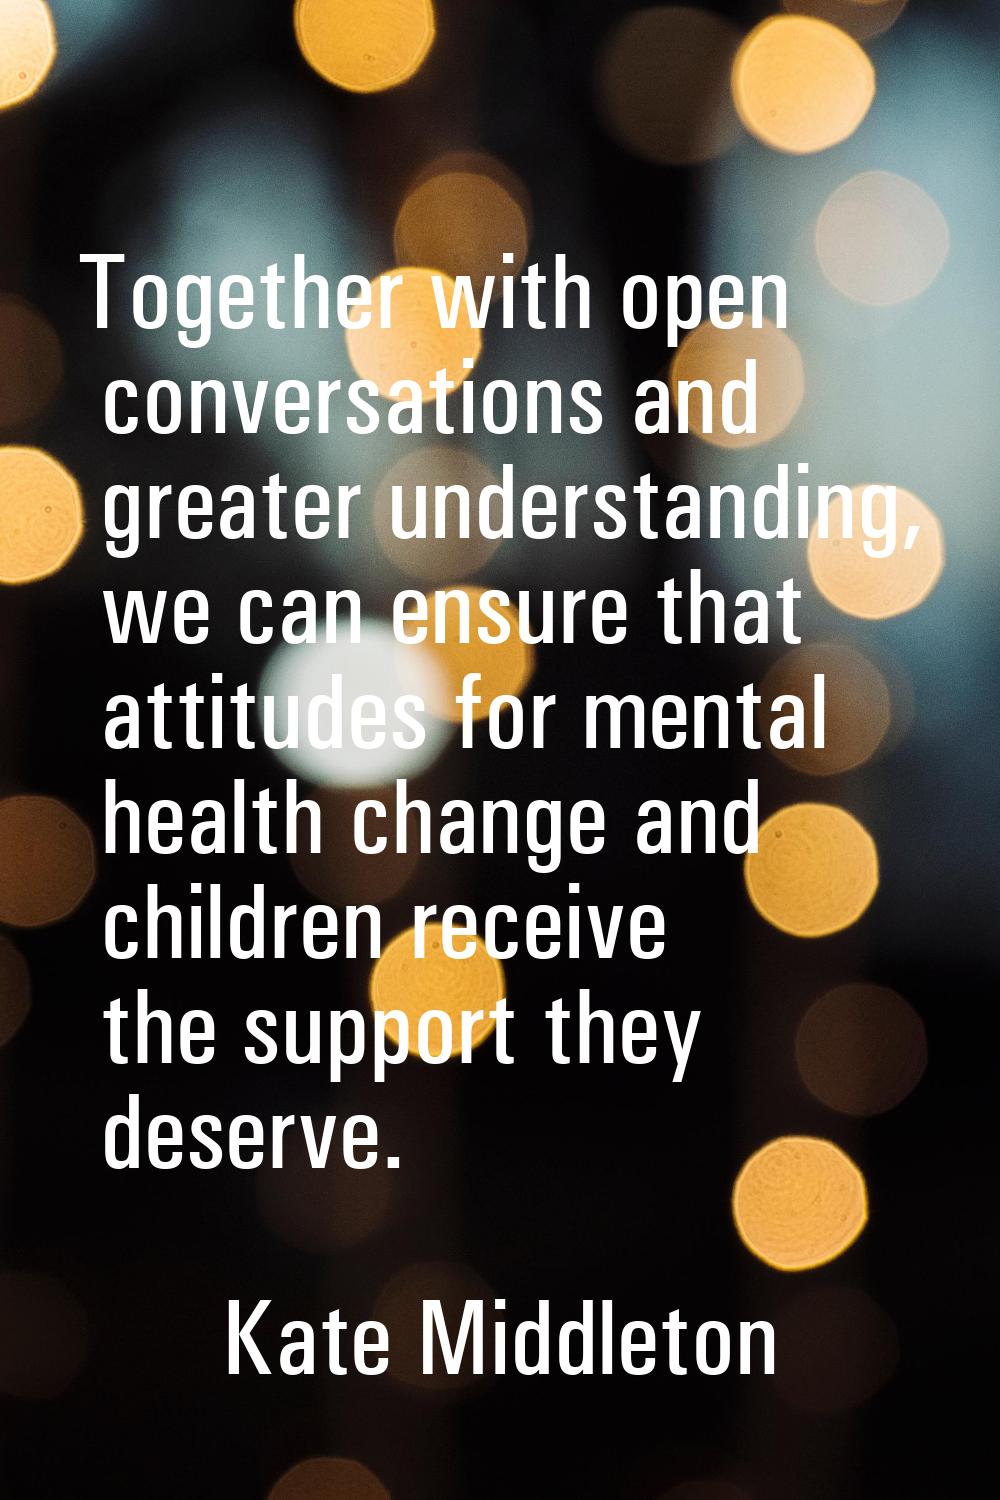 Together with open conversations and greater understanding, we can ensure that attitudes for mental